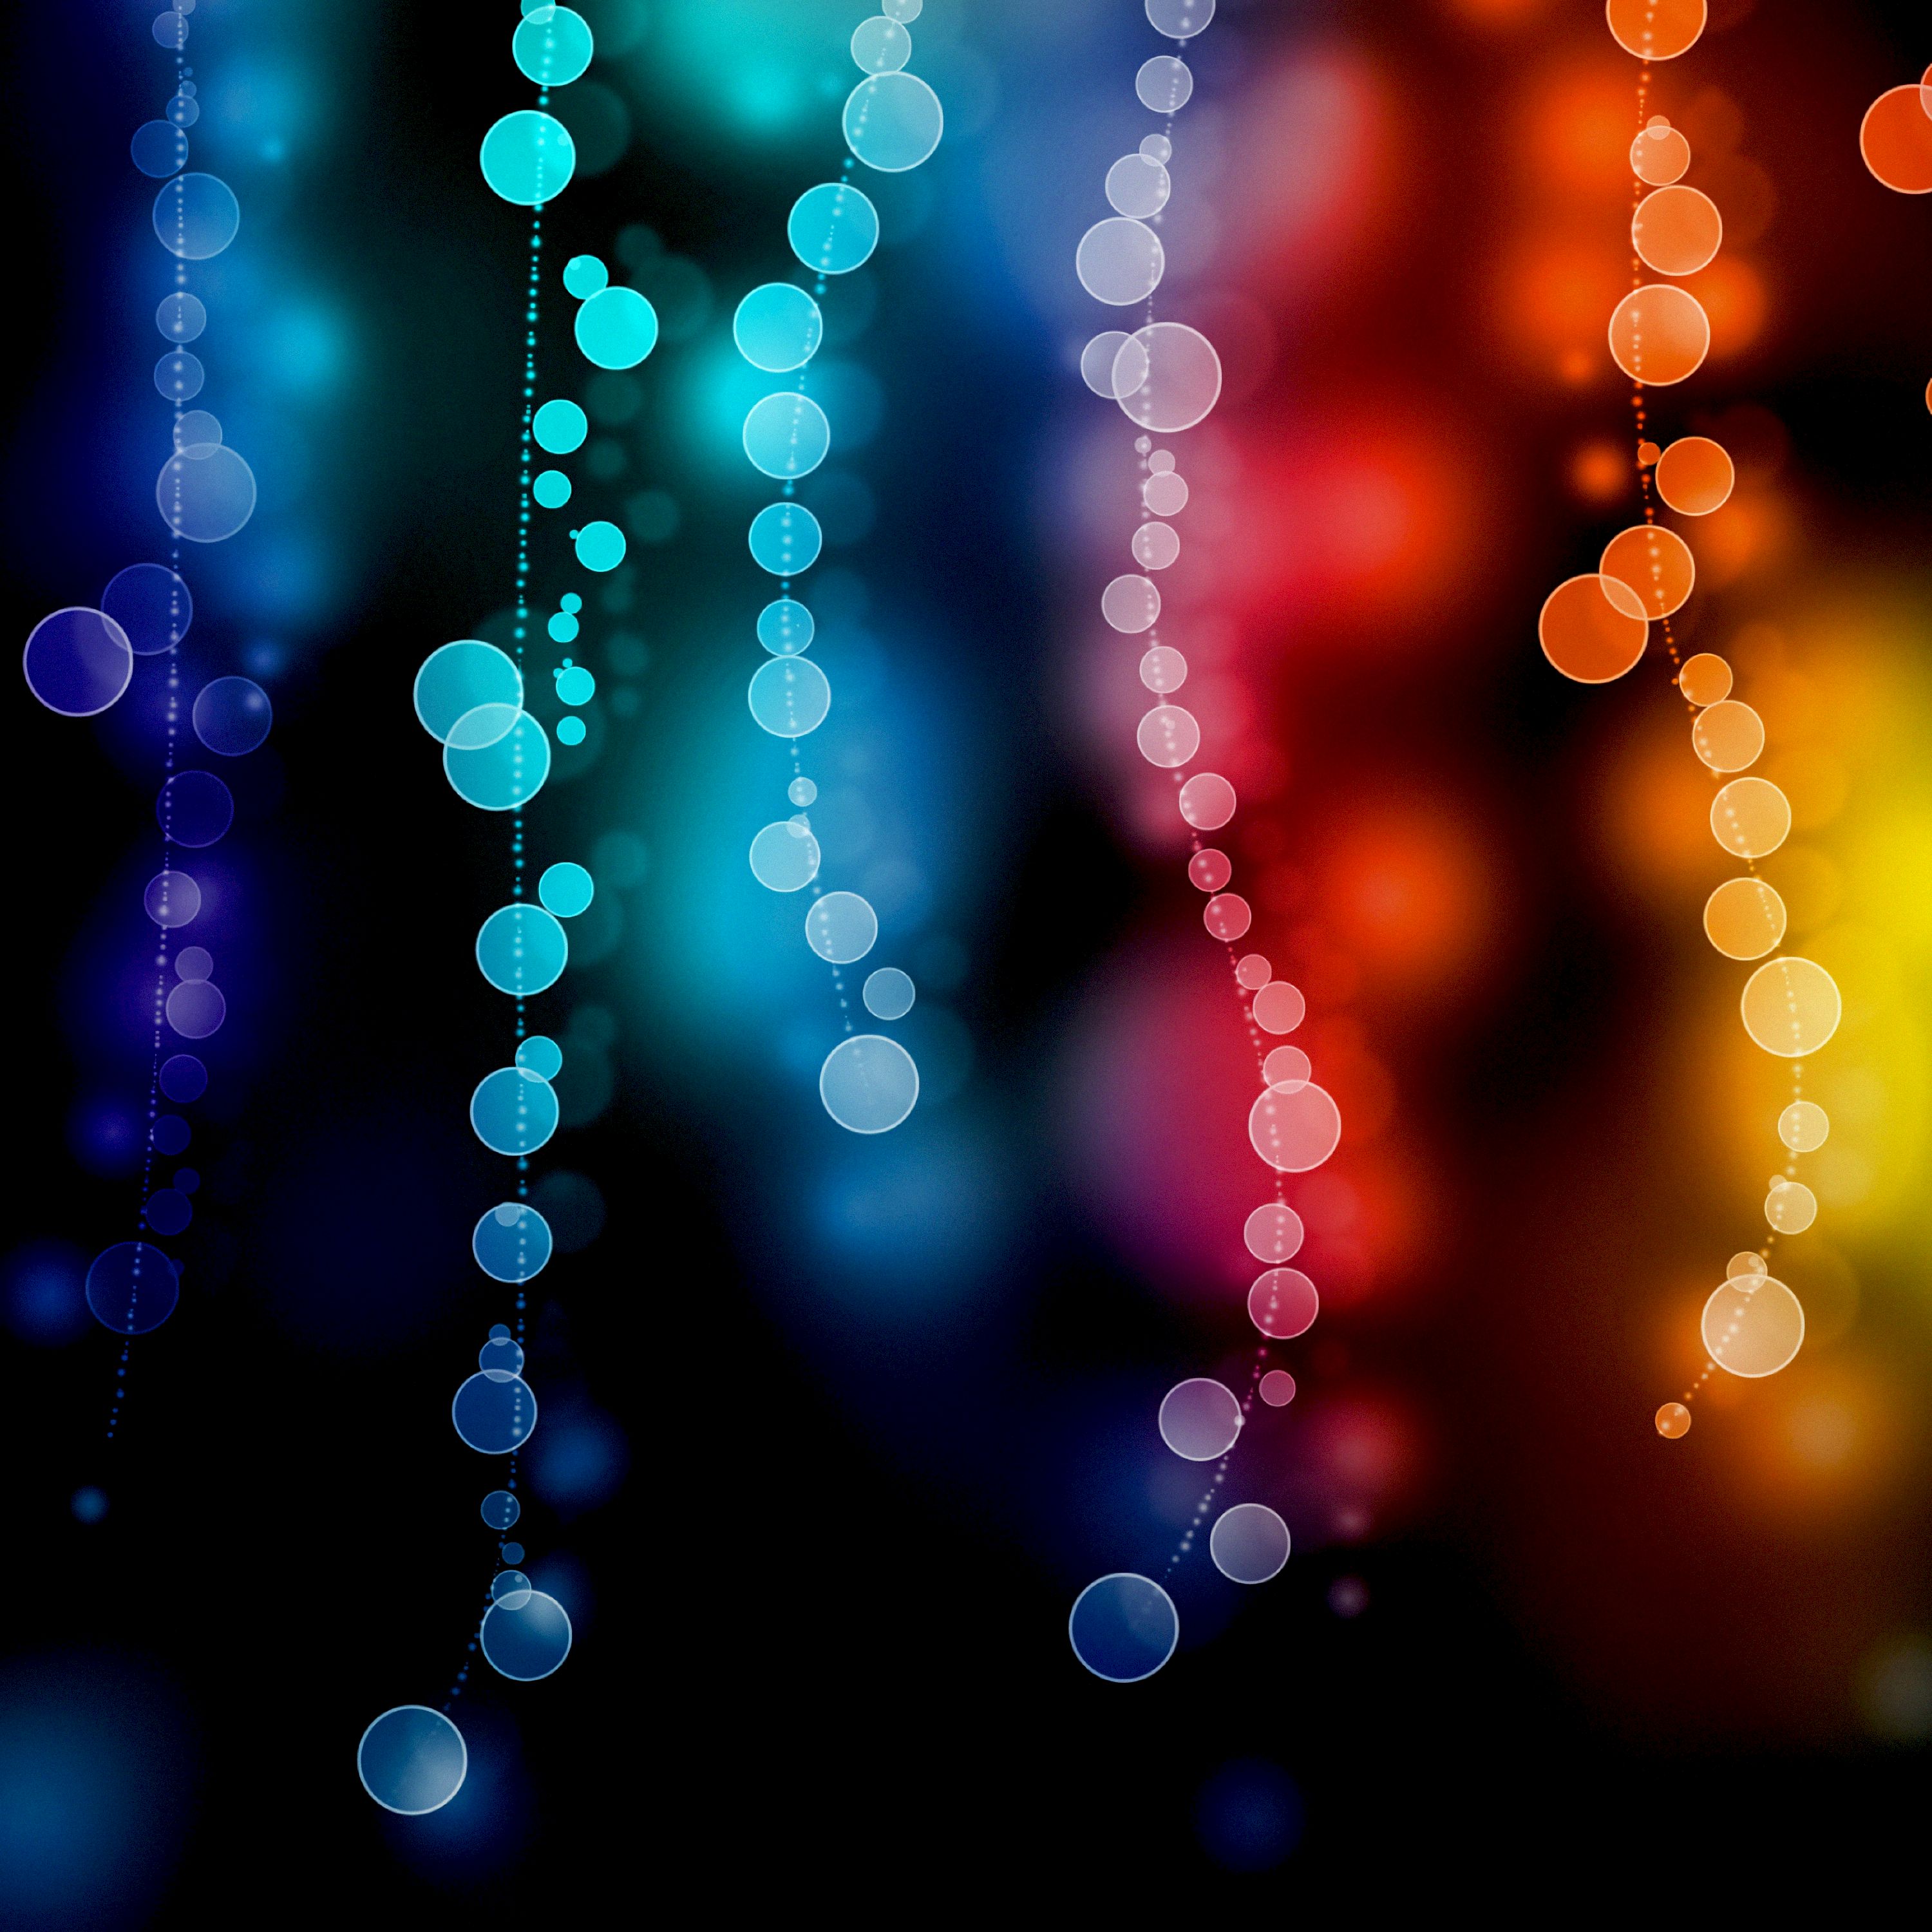 Cool Wallpapers bokeh, abstract, motley, glare, circles, multicolored, blur, smooth, boquet